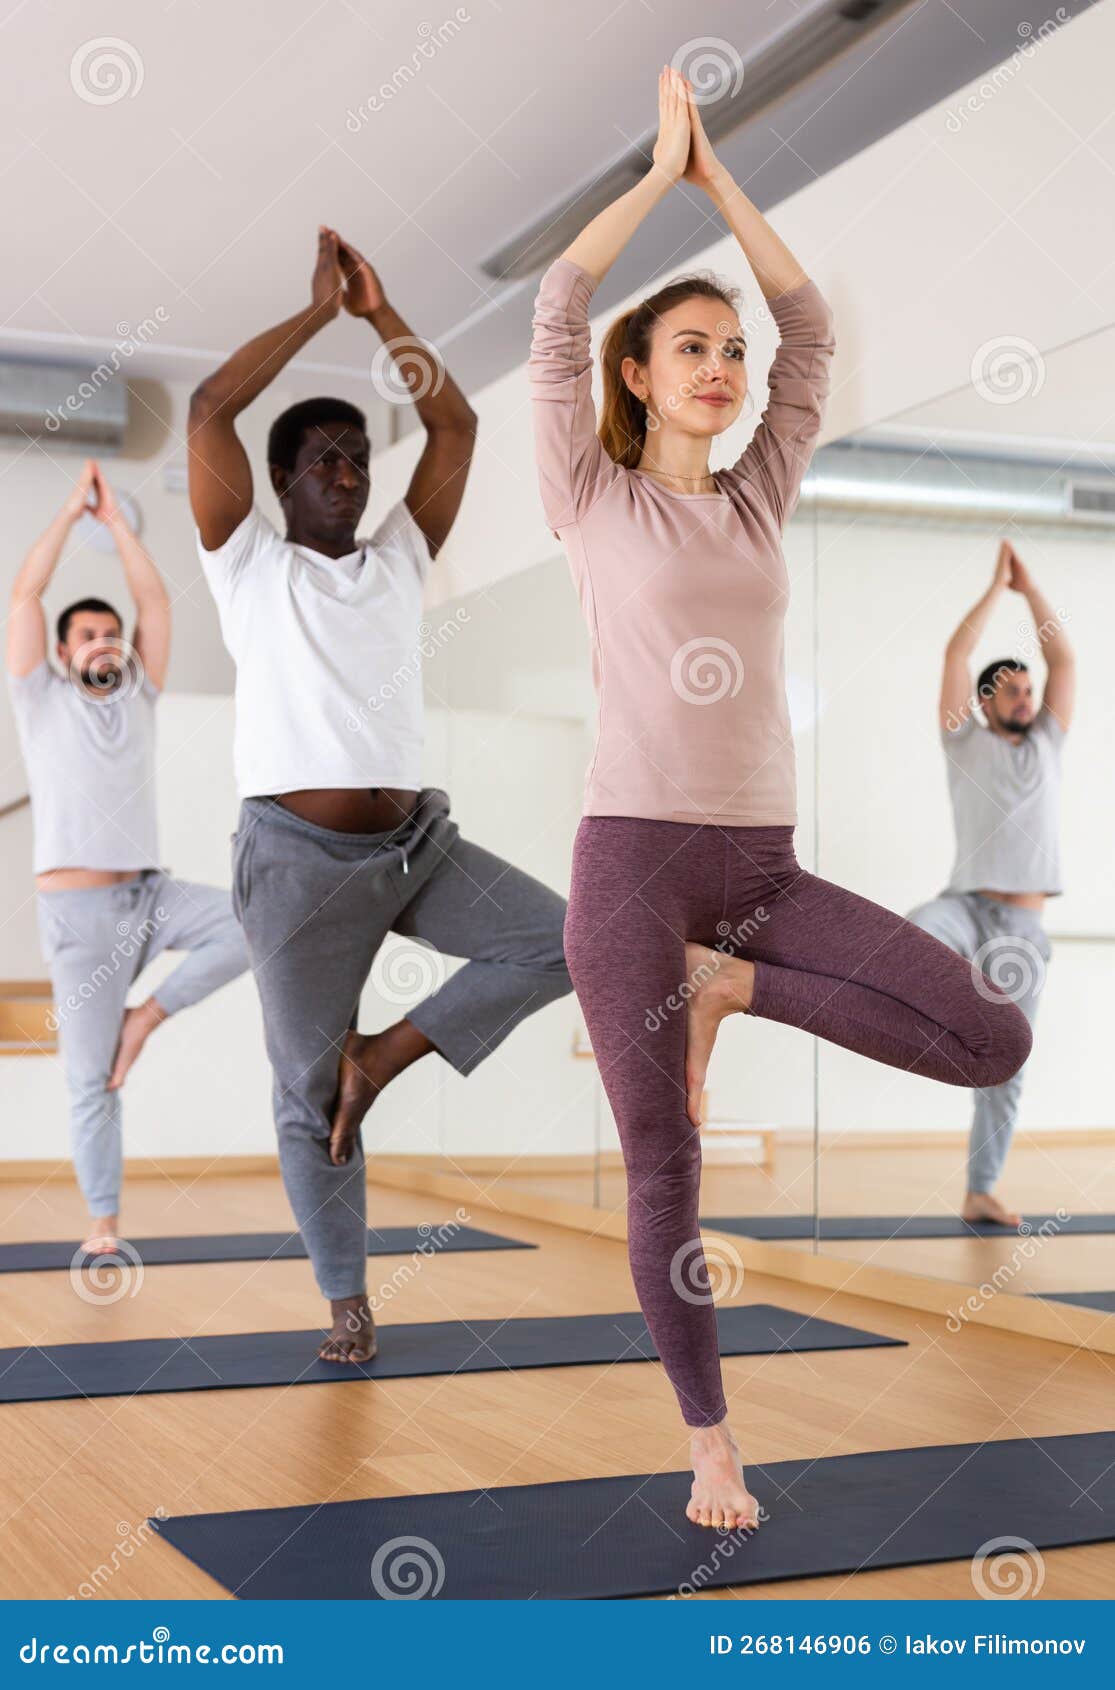 Five Best Yoga Poses for Kidneys